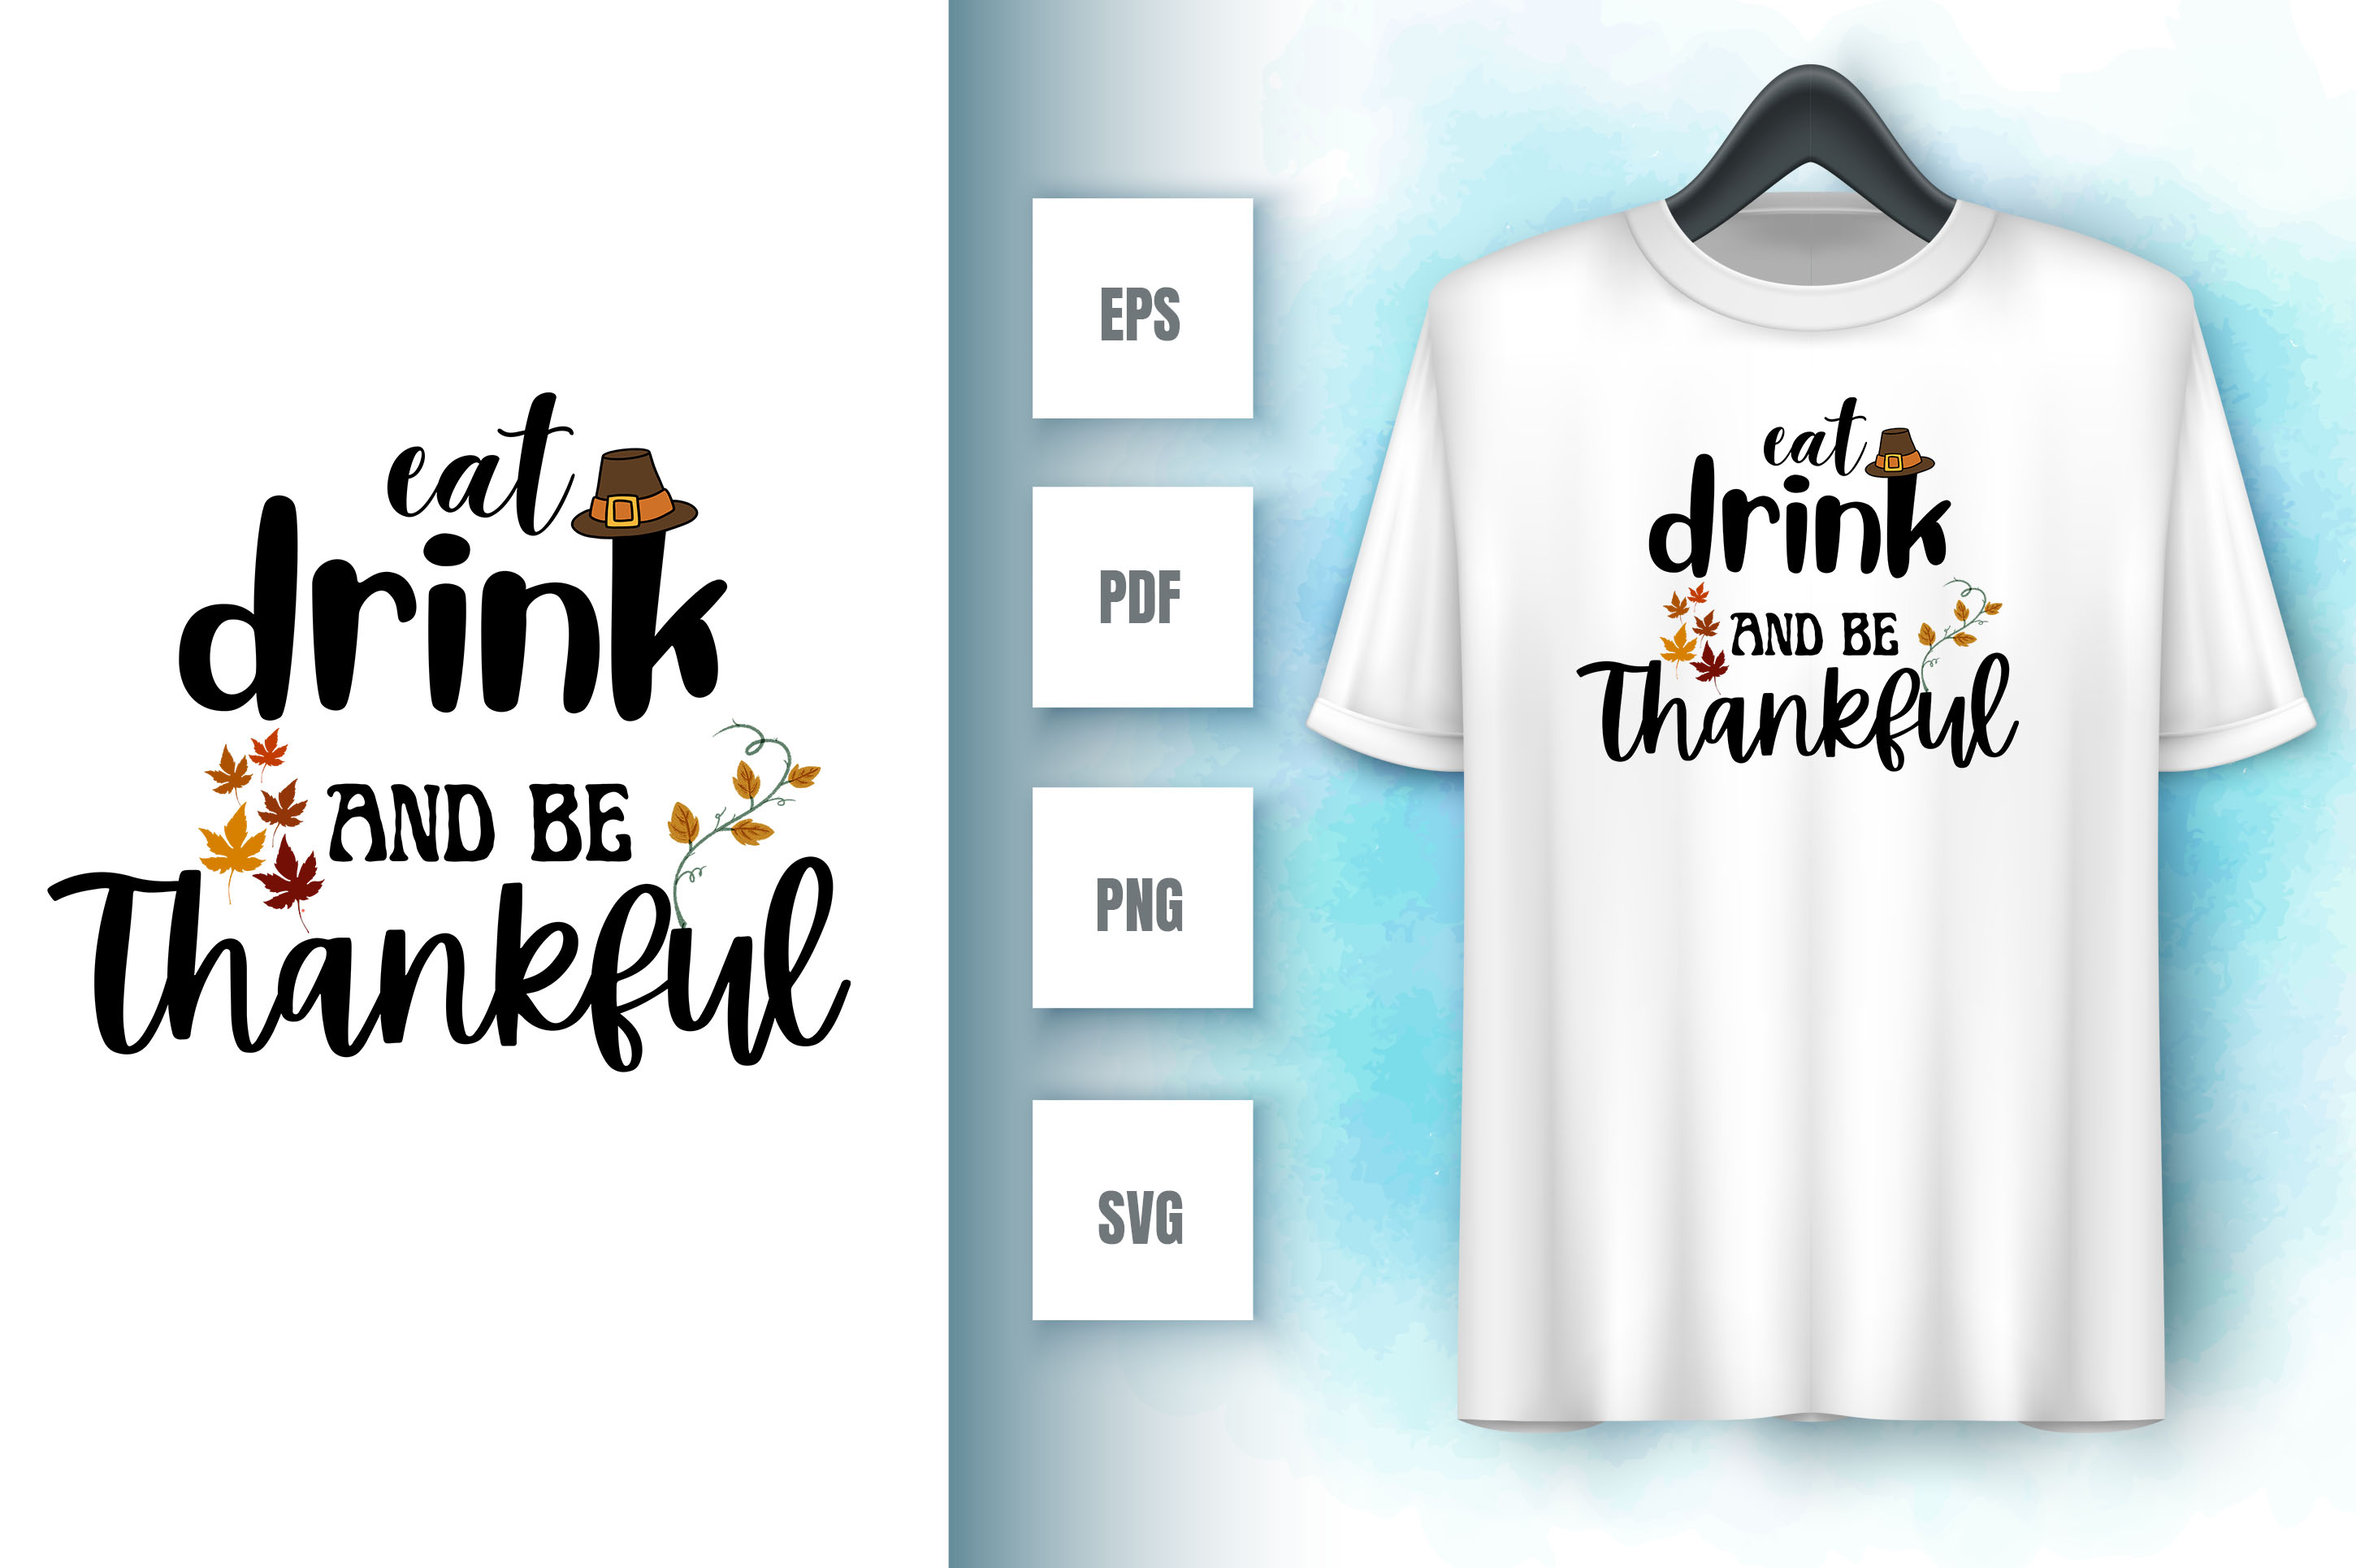 Image of a white t-shirt with an amazing inscription eat drink and be thankful